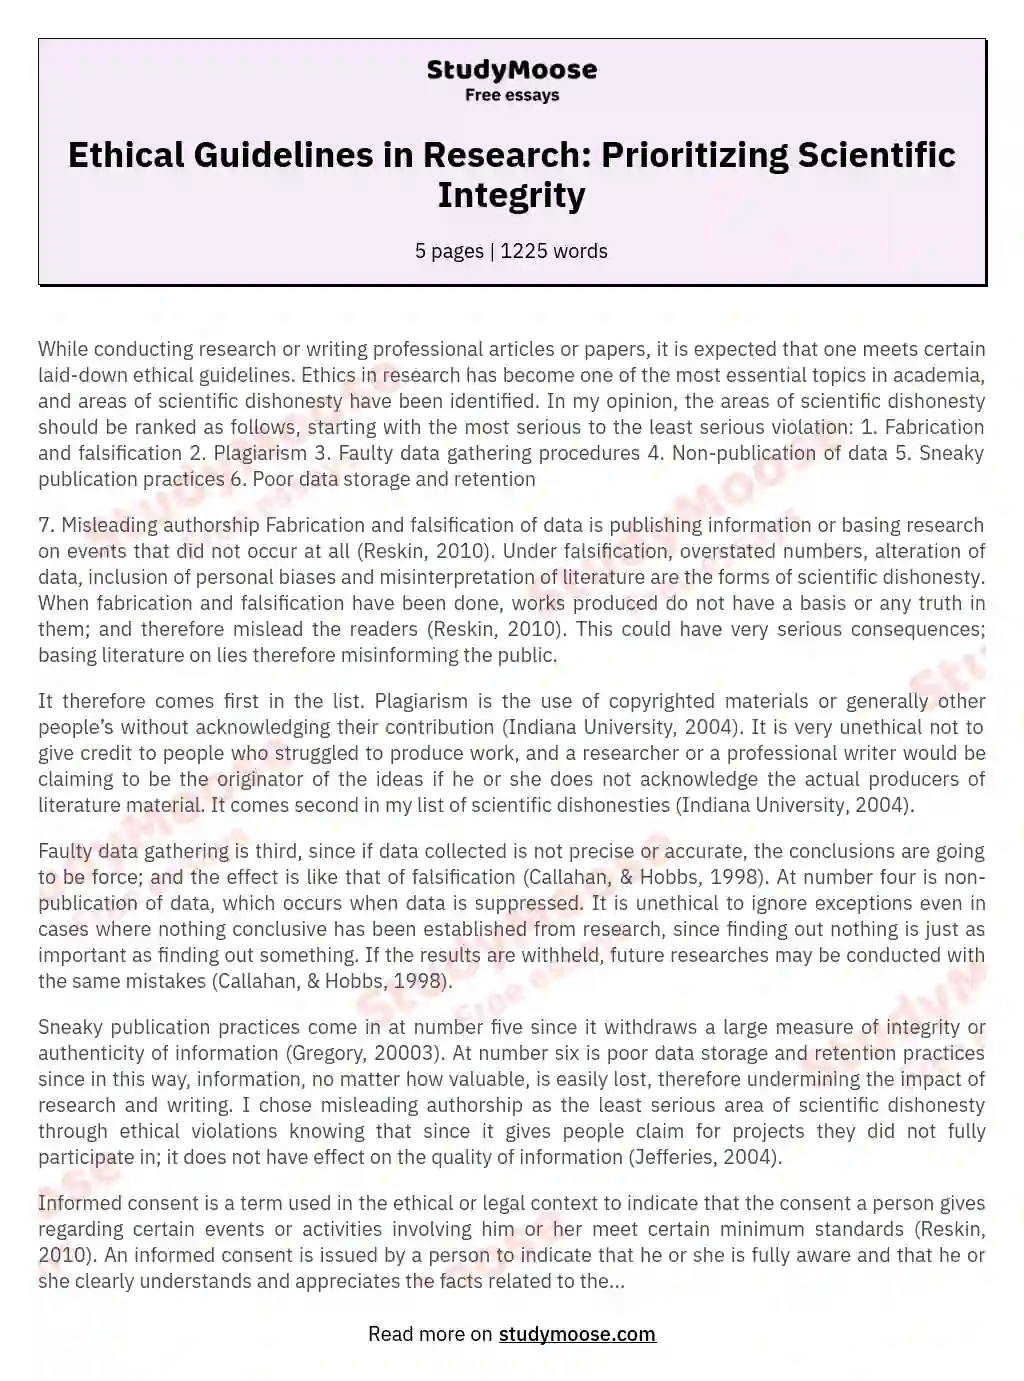 Ethical Guidelines in Research: Prioritizing Scientific Integrity essay